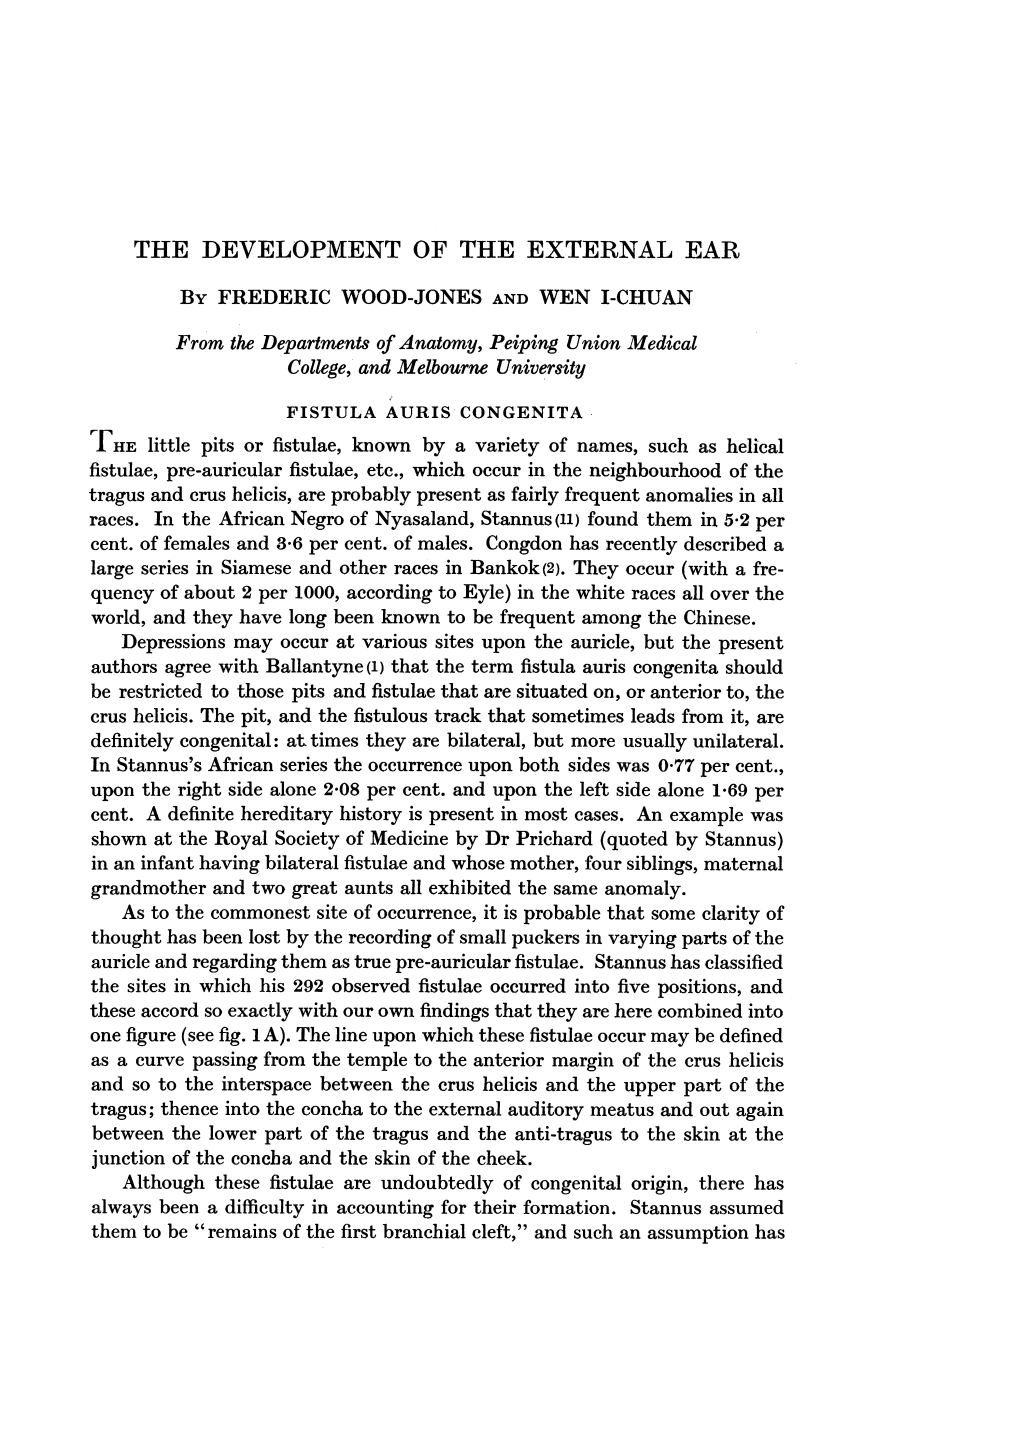 THE DEVELOPMENT of the EXTERNAL EAR by FREDERIC WOOD-JONES and WEN I-CHUAN from the Departments of Anatomy, Peiping Union Medical College, and Melbourne University